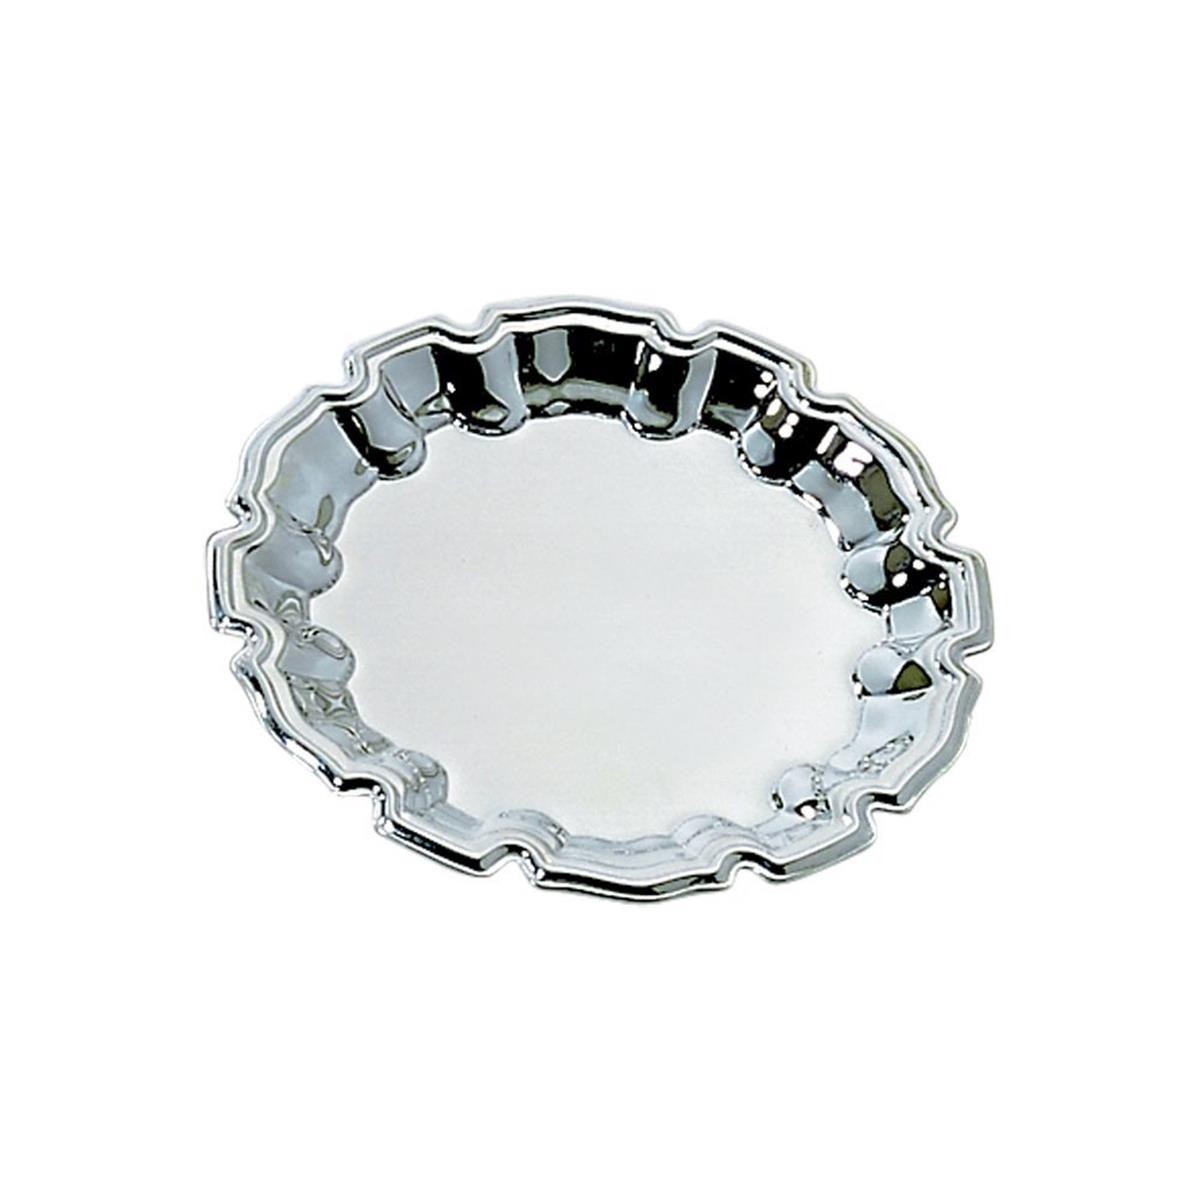 025100 5 In. Stainless Steel Chippendale Tray